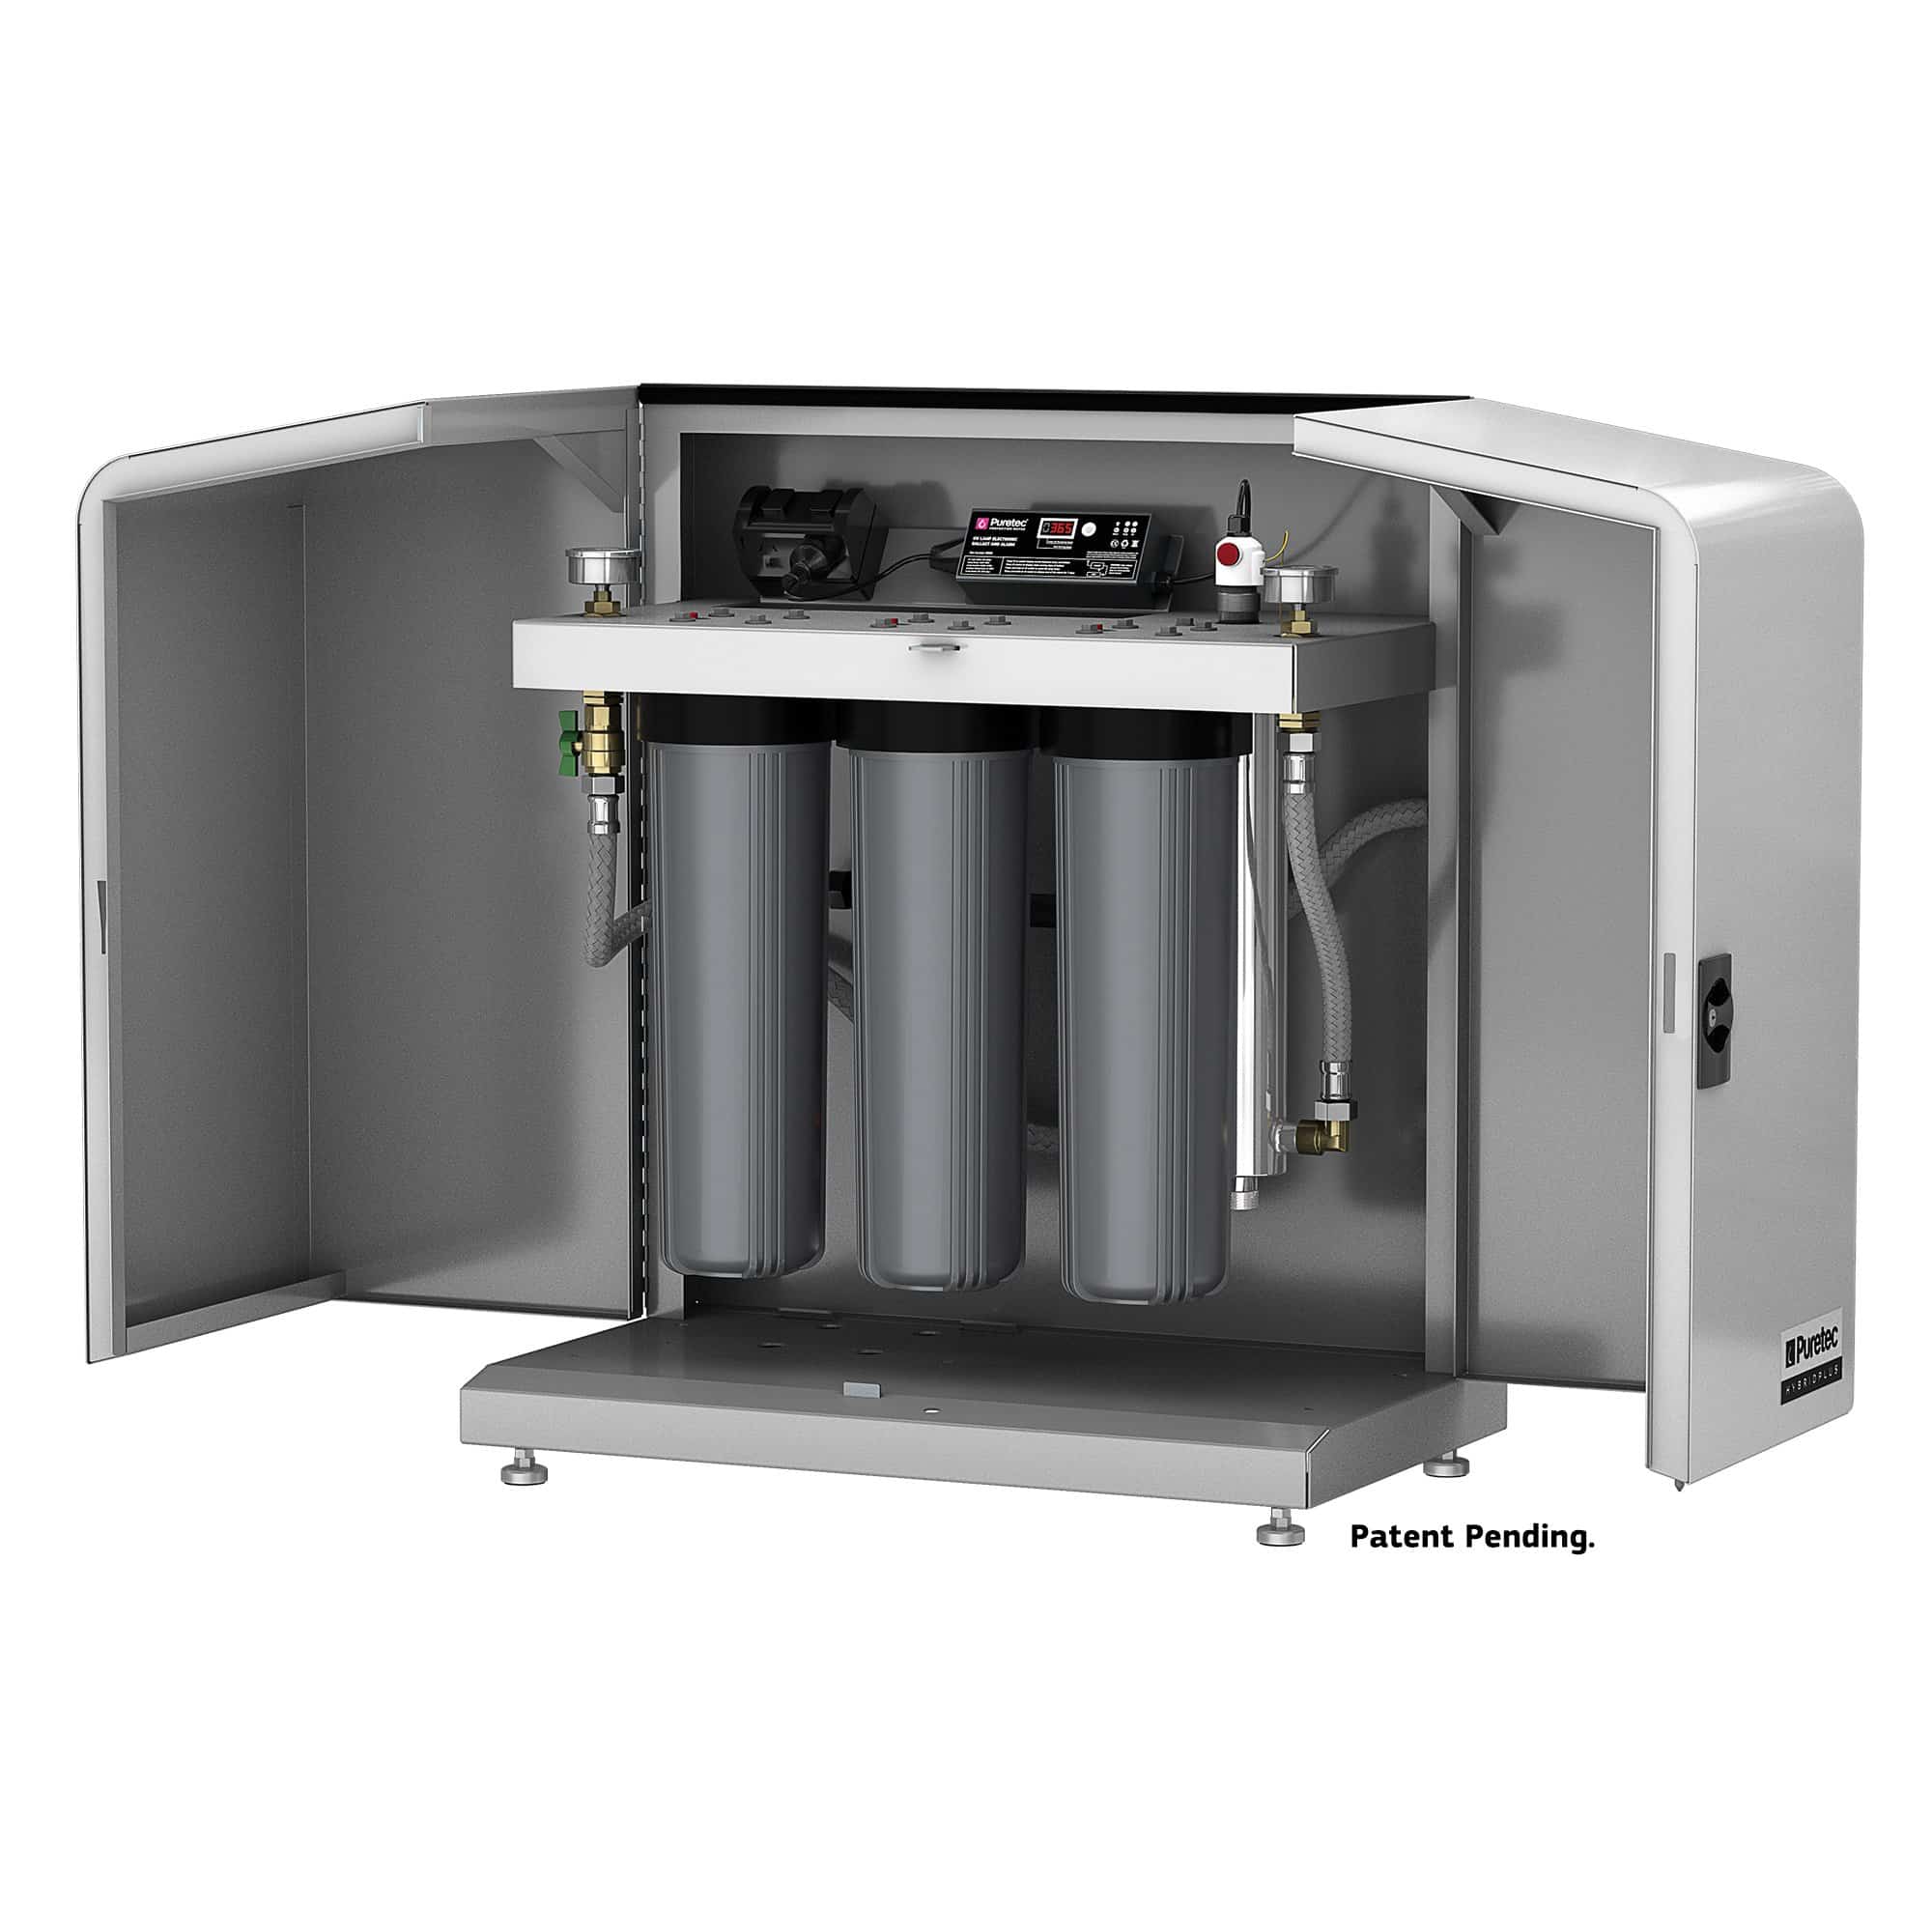 Puretec Hybrid filtration cabinet with gull-wing style doors